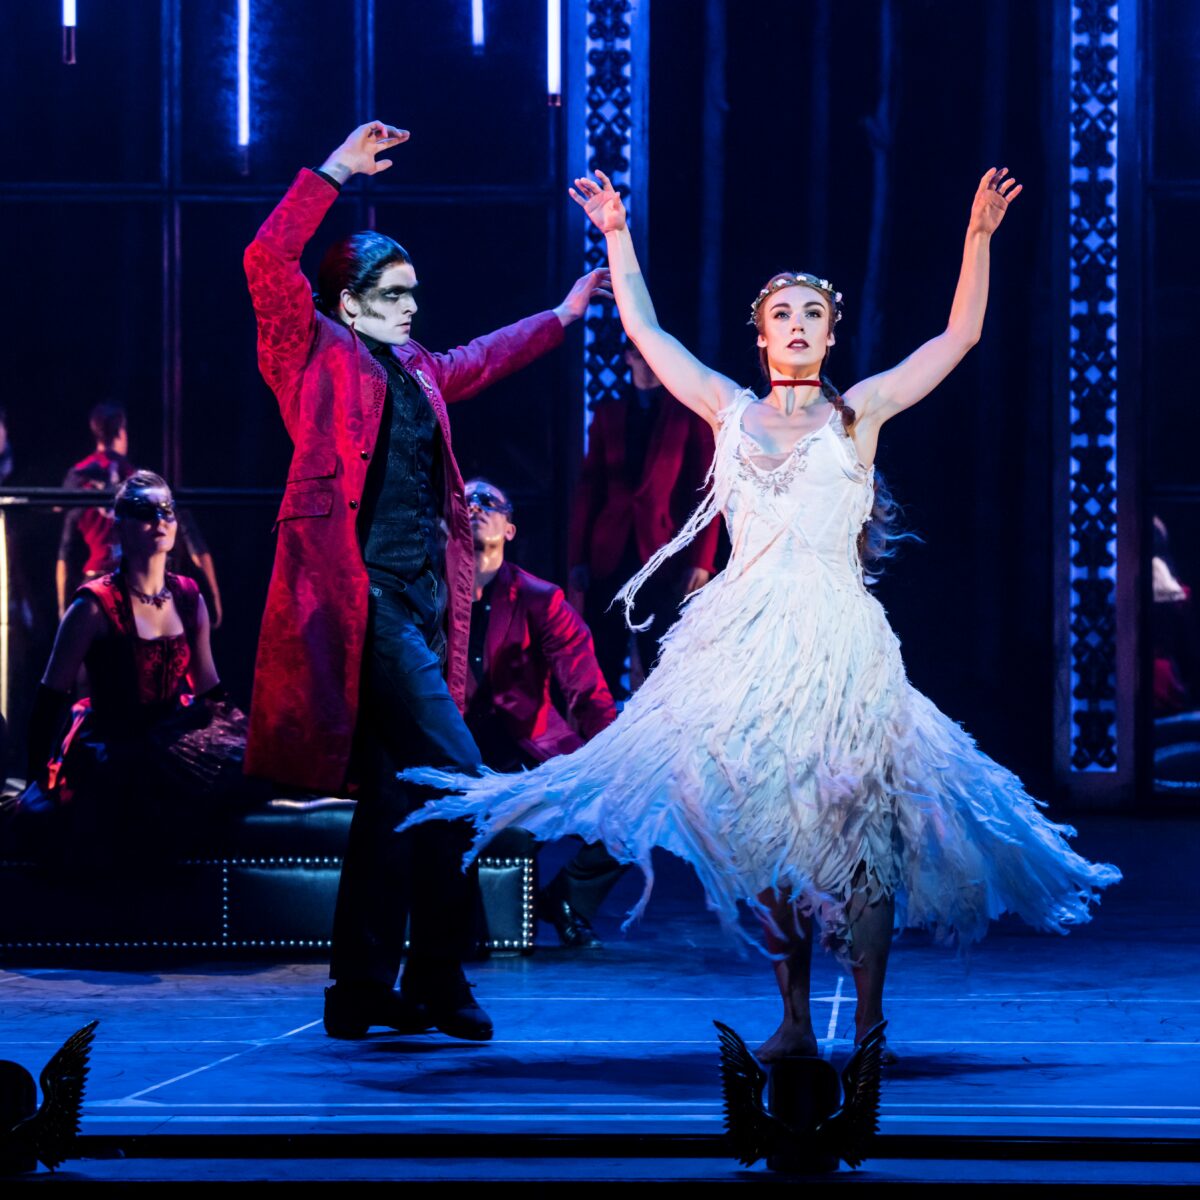 Preview: Matthew Bourne’s Sleeping Beauty: A Gothic Romance, Mayflower Theatre, Southampton from March 14